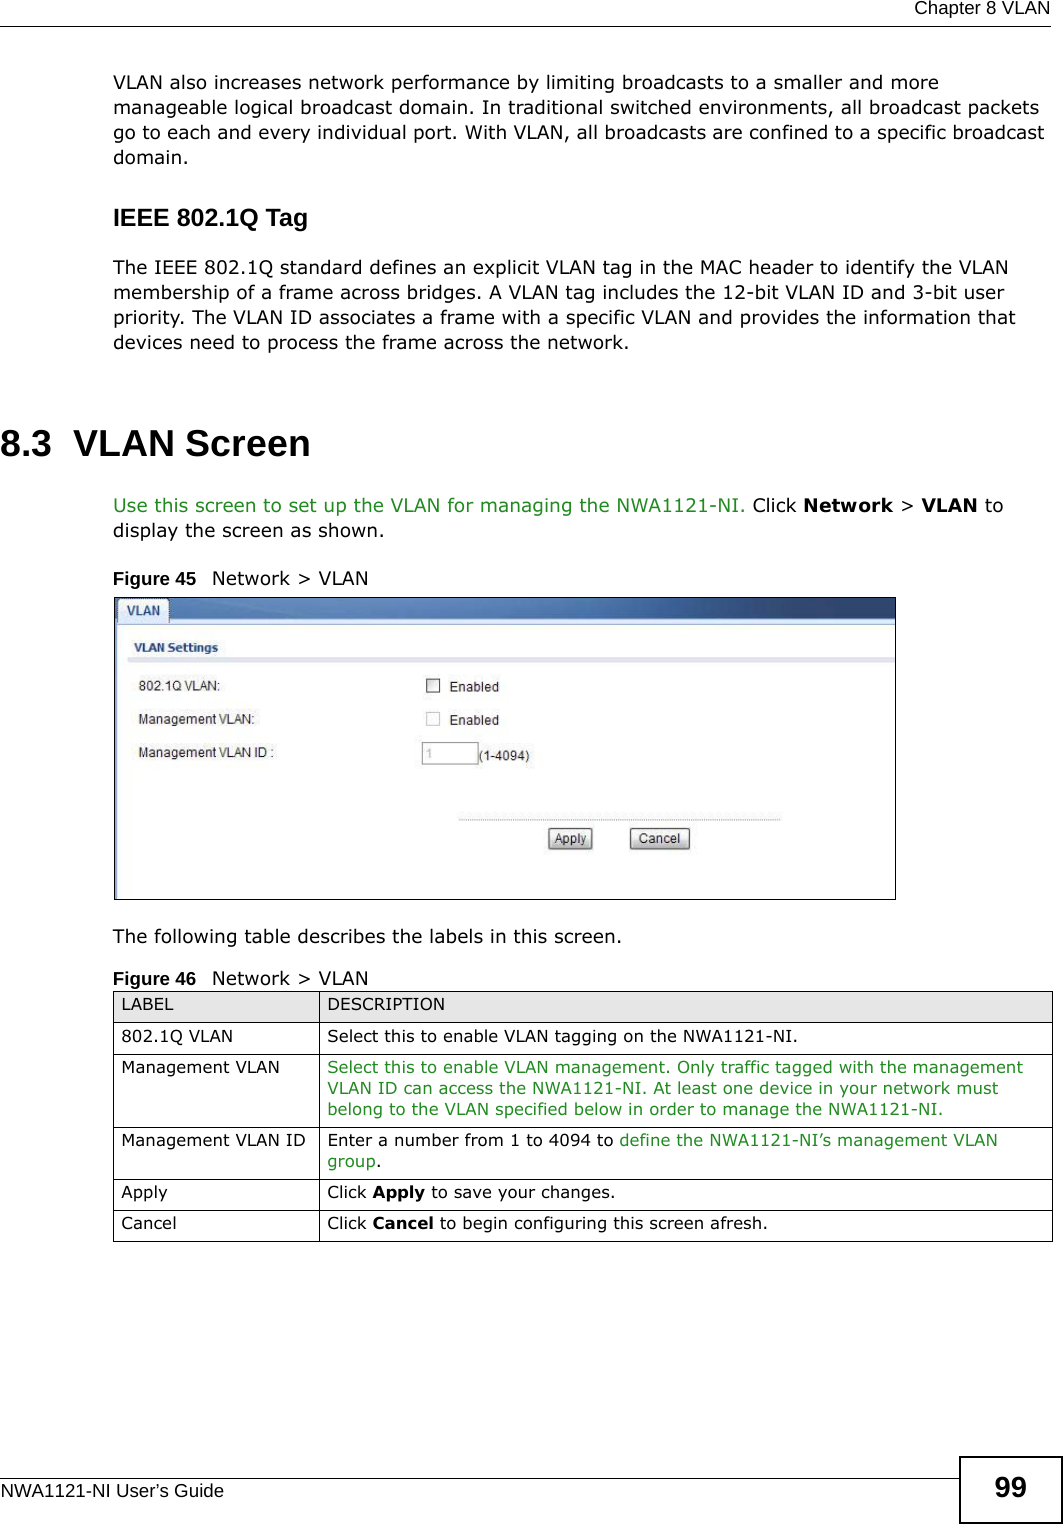  Chapter 8 VLANNWA1121-NI User’s Guide 99VLAN also increases network performance by limiting broadcasts to a smaller and more manageable logical broadcast domain. In traditional switched environments, all broadcast packets go to each and every individual port. With VLAN, all broadcasts are confined to a specific broadcast domain. IEEE 802.1Q TagThe IEEE 802.1Q standard defines an explicit VLAN tag in the MAC header to identify the VLAN membership of a frame across bridges. A VLAN tag includes the 12-bit VLAN ID and 3-bit user priority. The VLAN ID associates a frame with a specific VLAN and provides the information that devices need to process the frame across the network. 8.3  VLAN ScreenUse this screen to set up the VLAN for managing the NWA1121-NI. Click Network &gt; VLAN to display the screen as shown.Figure 45   Network &gt; VLANThe following table describes the labels in this screen.Figure 46   Network &gt; VLANLABEL DESCRIPTION802.1Q VLAN  Select this to enable VLAN tagging on the NWA1121-NI.Management VLAN Select this to enable VLAN management. Only traffic tagged with the management VLAN ID can access the NWA1121-NI. At least one device in your network must belong to the VLAN specified below in order to manage the NWA1121-NI.Management VLAN ID Enter a number from 1 to 4094 to define the NWA1121-NI’s management VLAN group. Apply Click Apply to save your changes.Cancel Click Cancel to begin configuring this screen afresh.